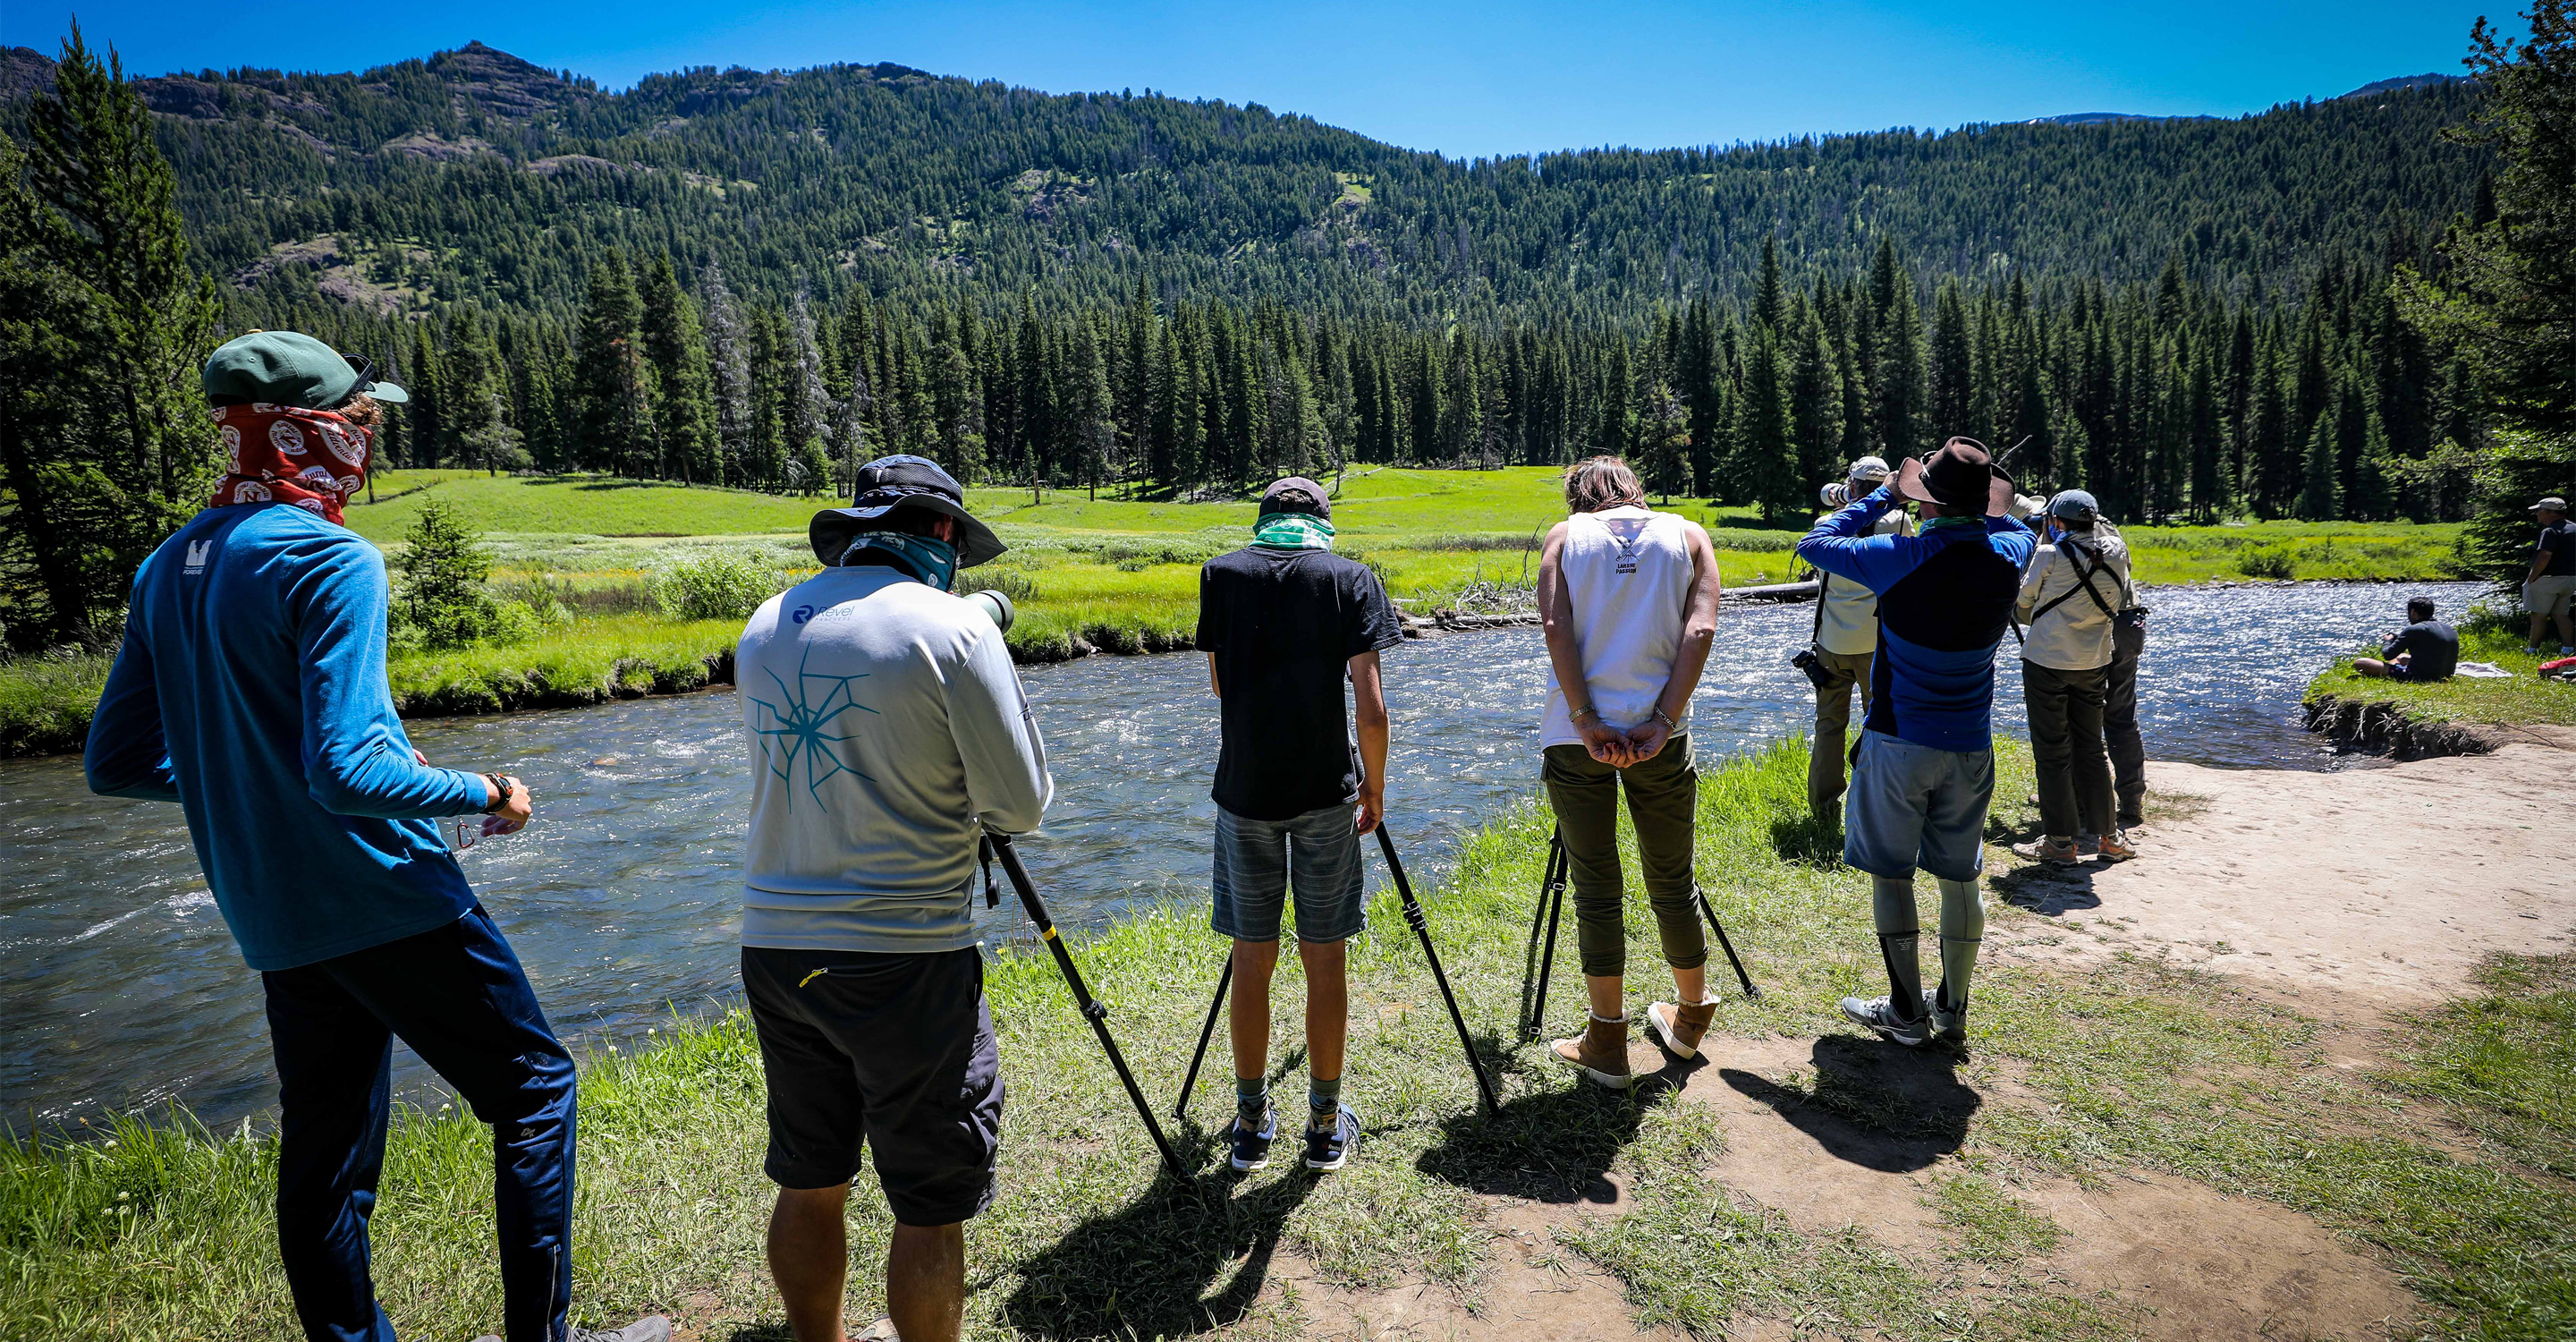 Travelers in Yellowstone National Park stand along the edge of a river and view wildlife through scopes, United States